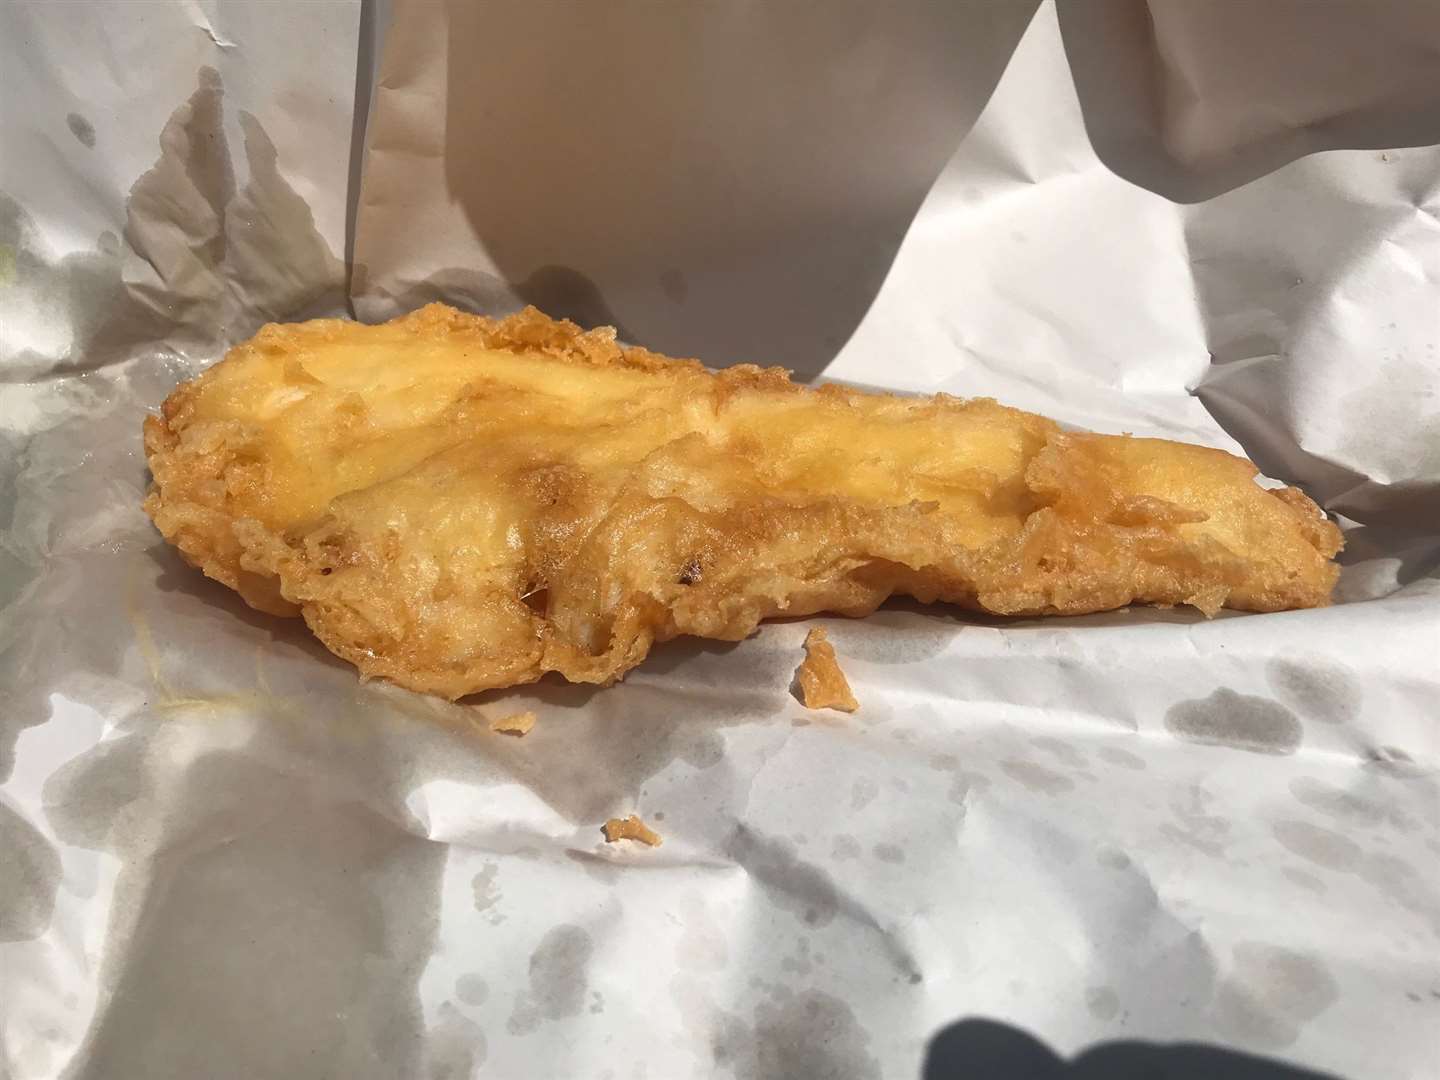 Battered cod - can it defend its traditional crown as king of the chip shop menu?